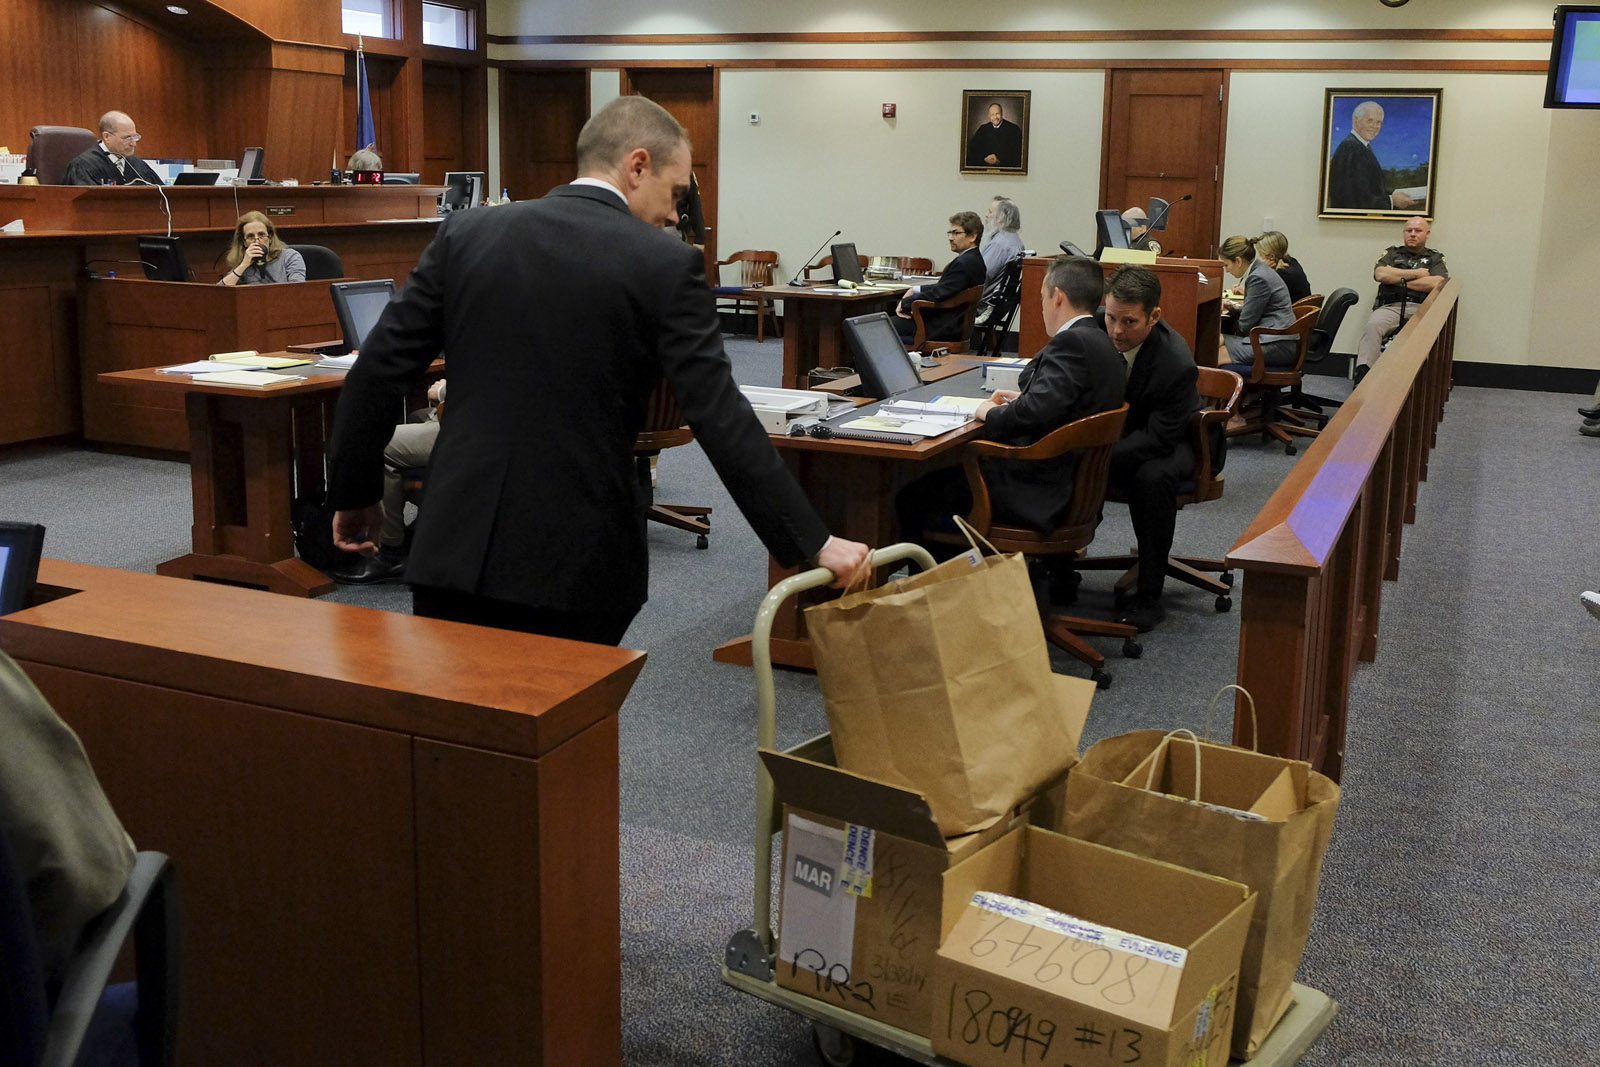 Defense attorney Chris Leibig wheels a cart of evidence to the front of the courtroom at the trial for alleged Alexandria serial killer Charles Severance at the Fairfax County Circuit Court on Wednesday, October 14, 2015.  He is accused of three murders over a 12 year period, believed to be revenge against the Alexandria court system and the citizens of the city.  
(Pool Photo by Jahi Chikwendiu/The Washington Post)